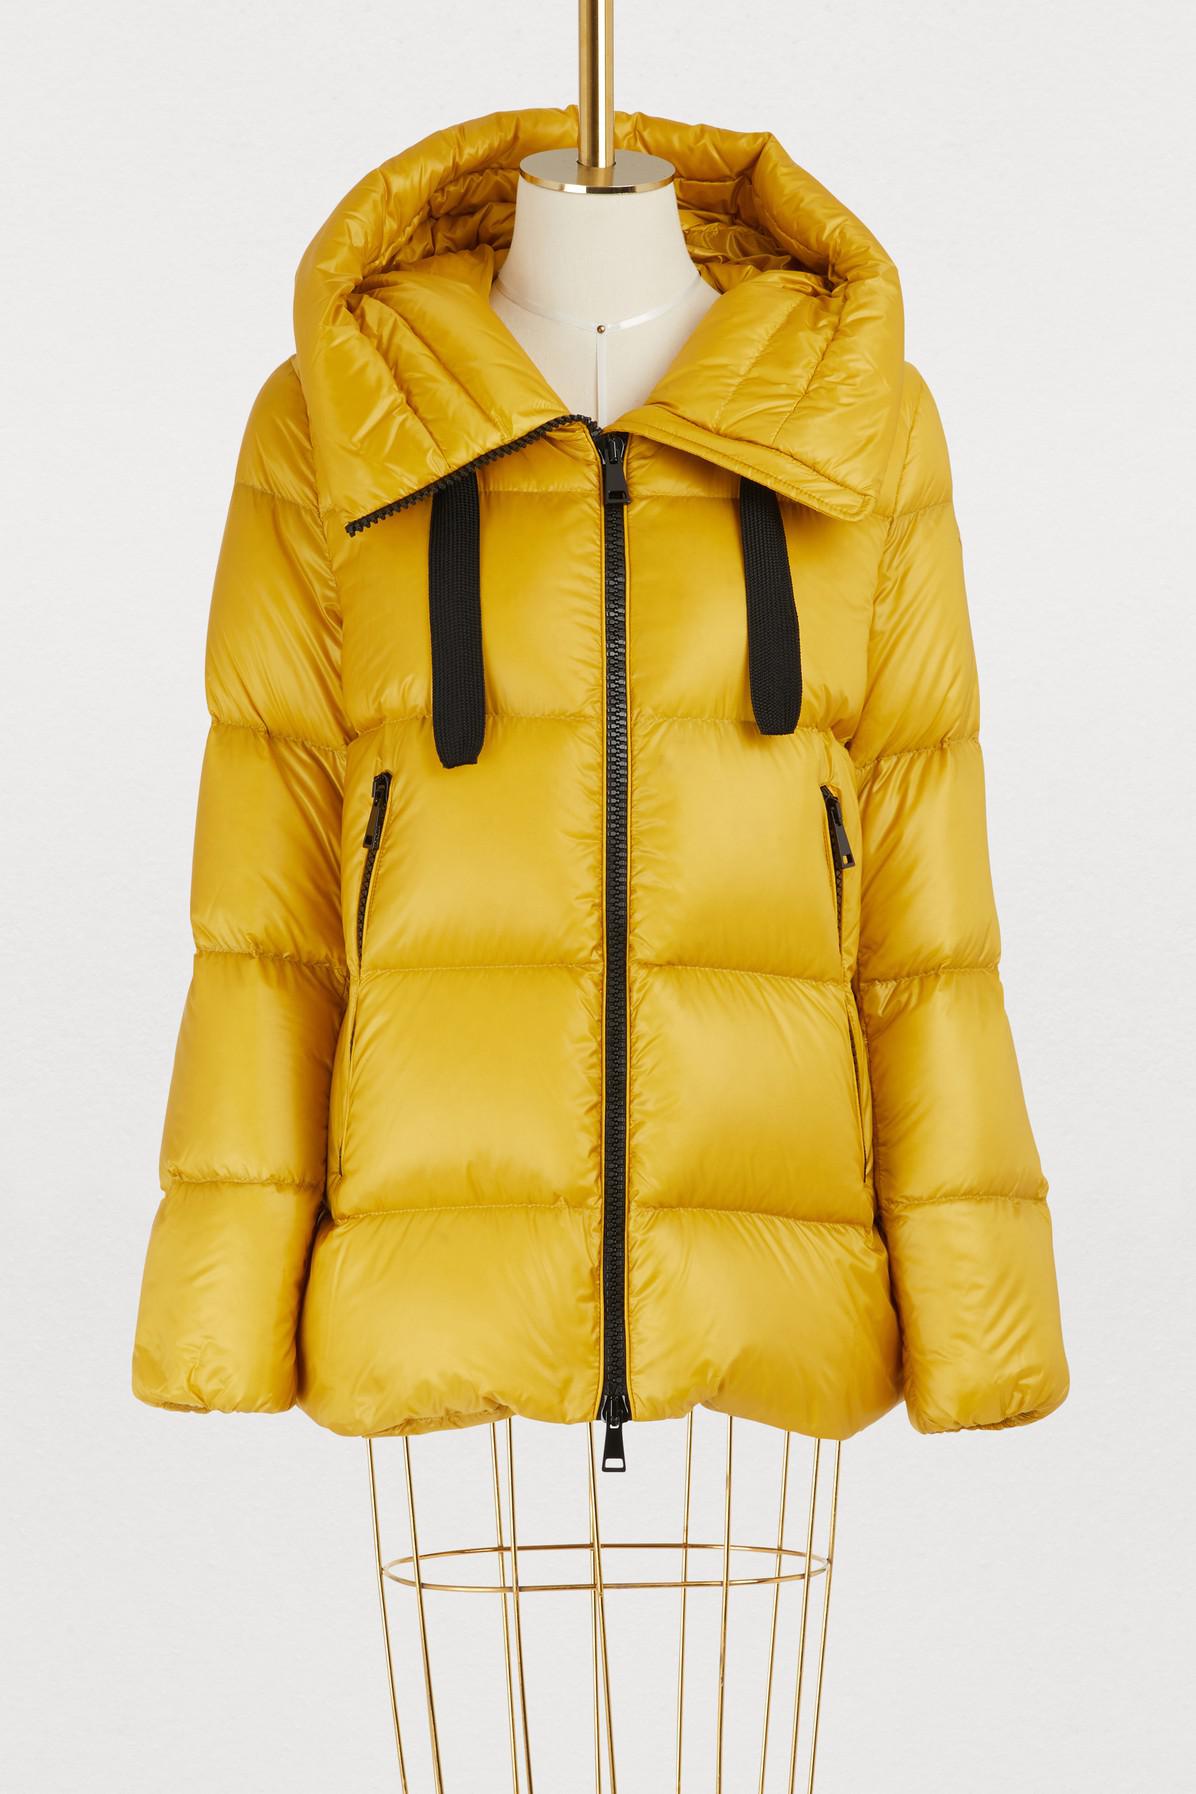 Moncler Serin Jacket in Yellow - Lyst